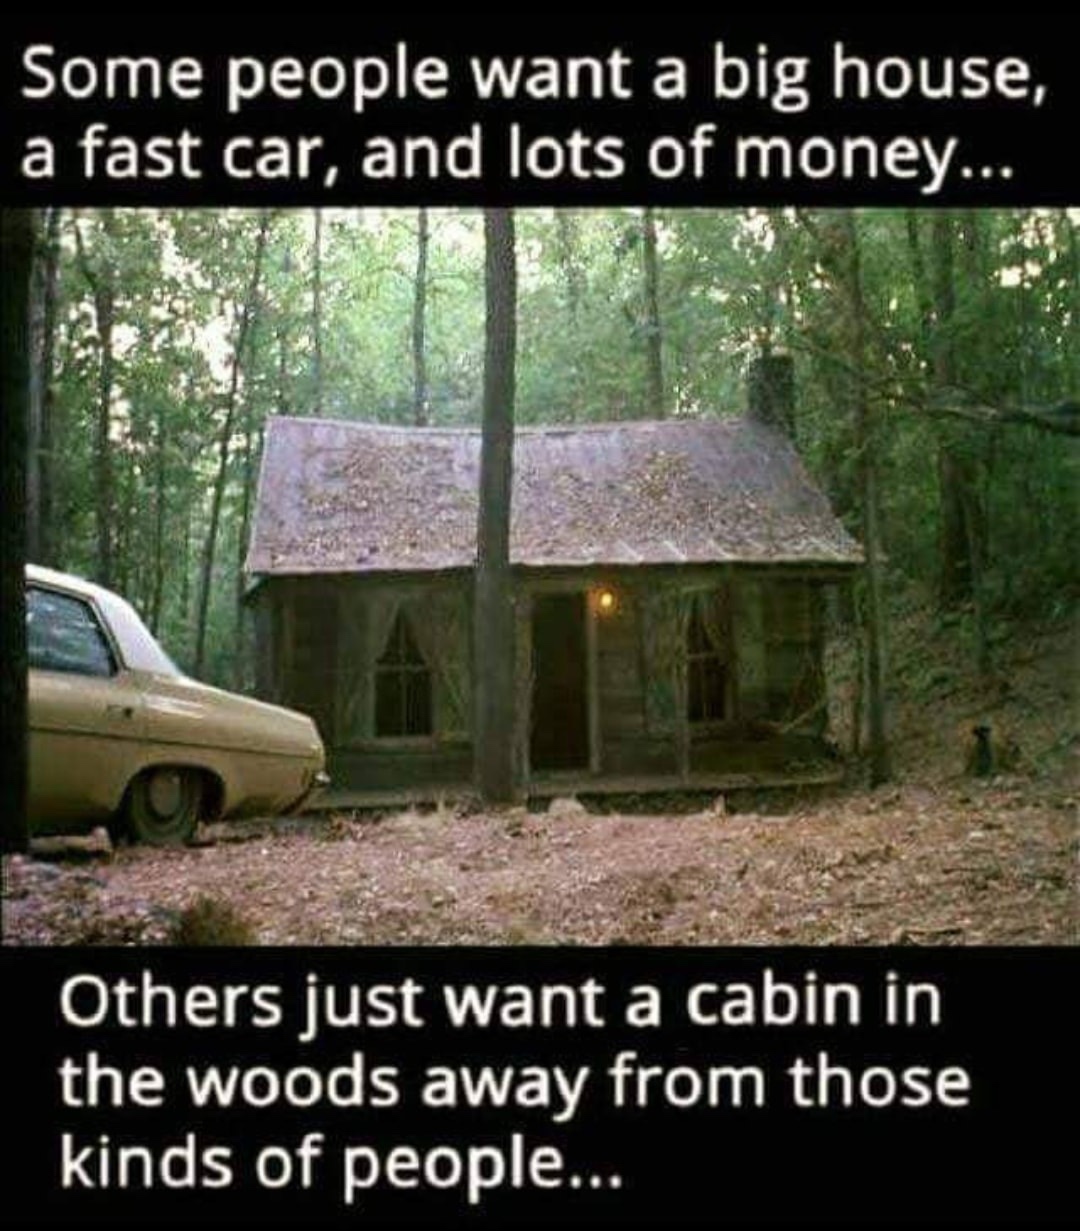 log cabin quotes - Some people want a big house, a fast car, and lots of money... Others just want a cabin in the woods away from those kinds of people...